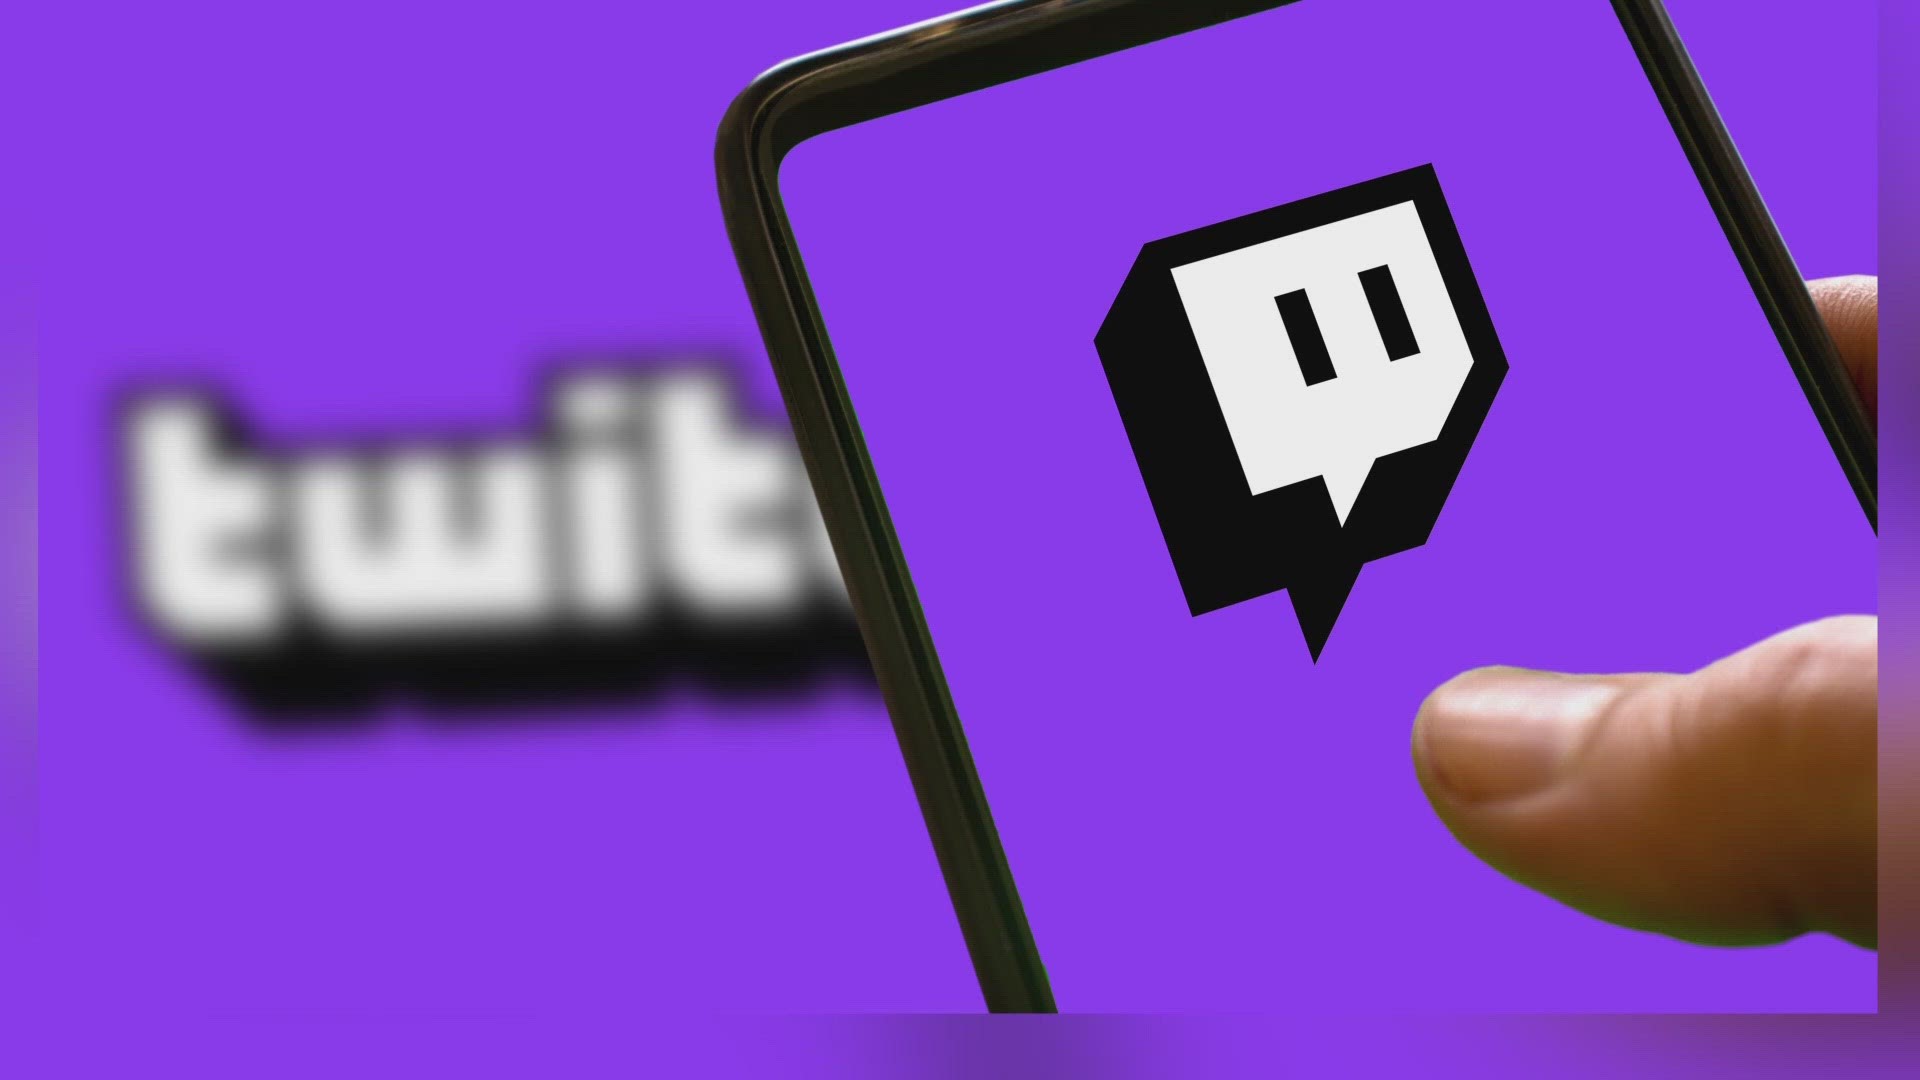 Twitch, the video game streaming platform acquired by Amazon a decade ago for close to $1 billion, is laying off more than 500 employees.